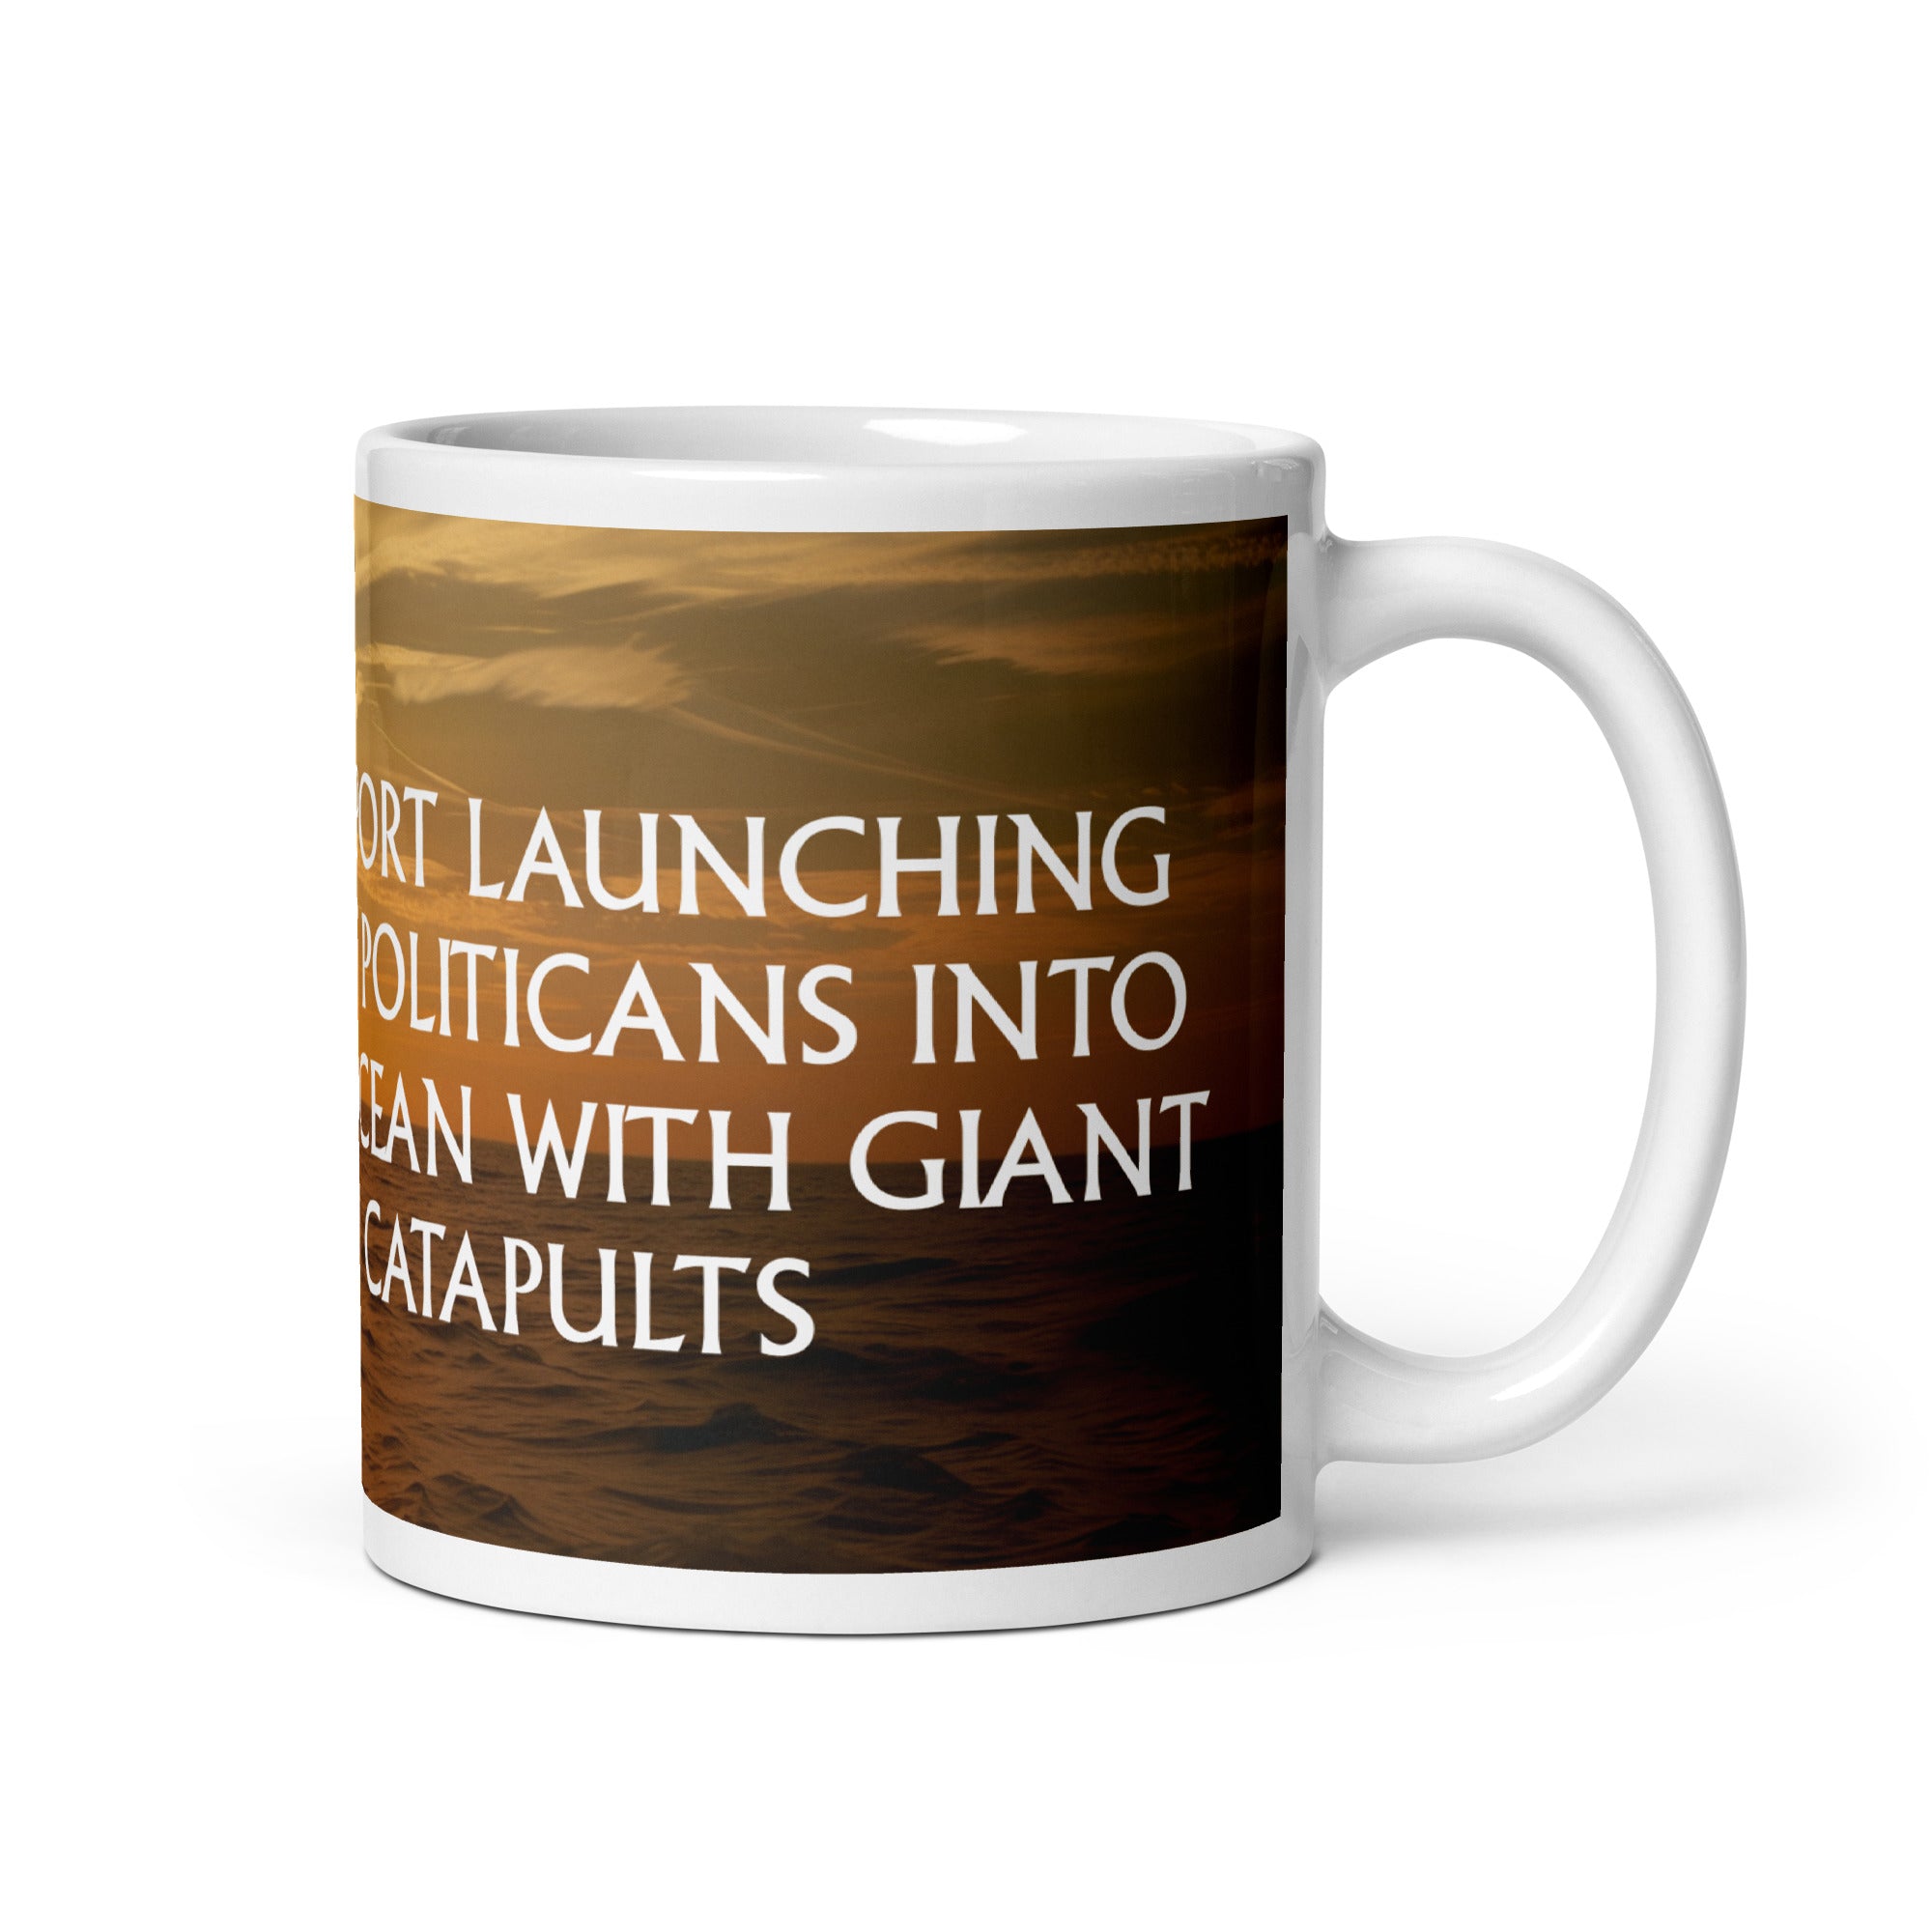 I Support Launching Most Politicians into the Ocean with Giant Catapults Mug